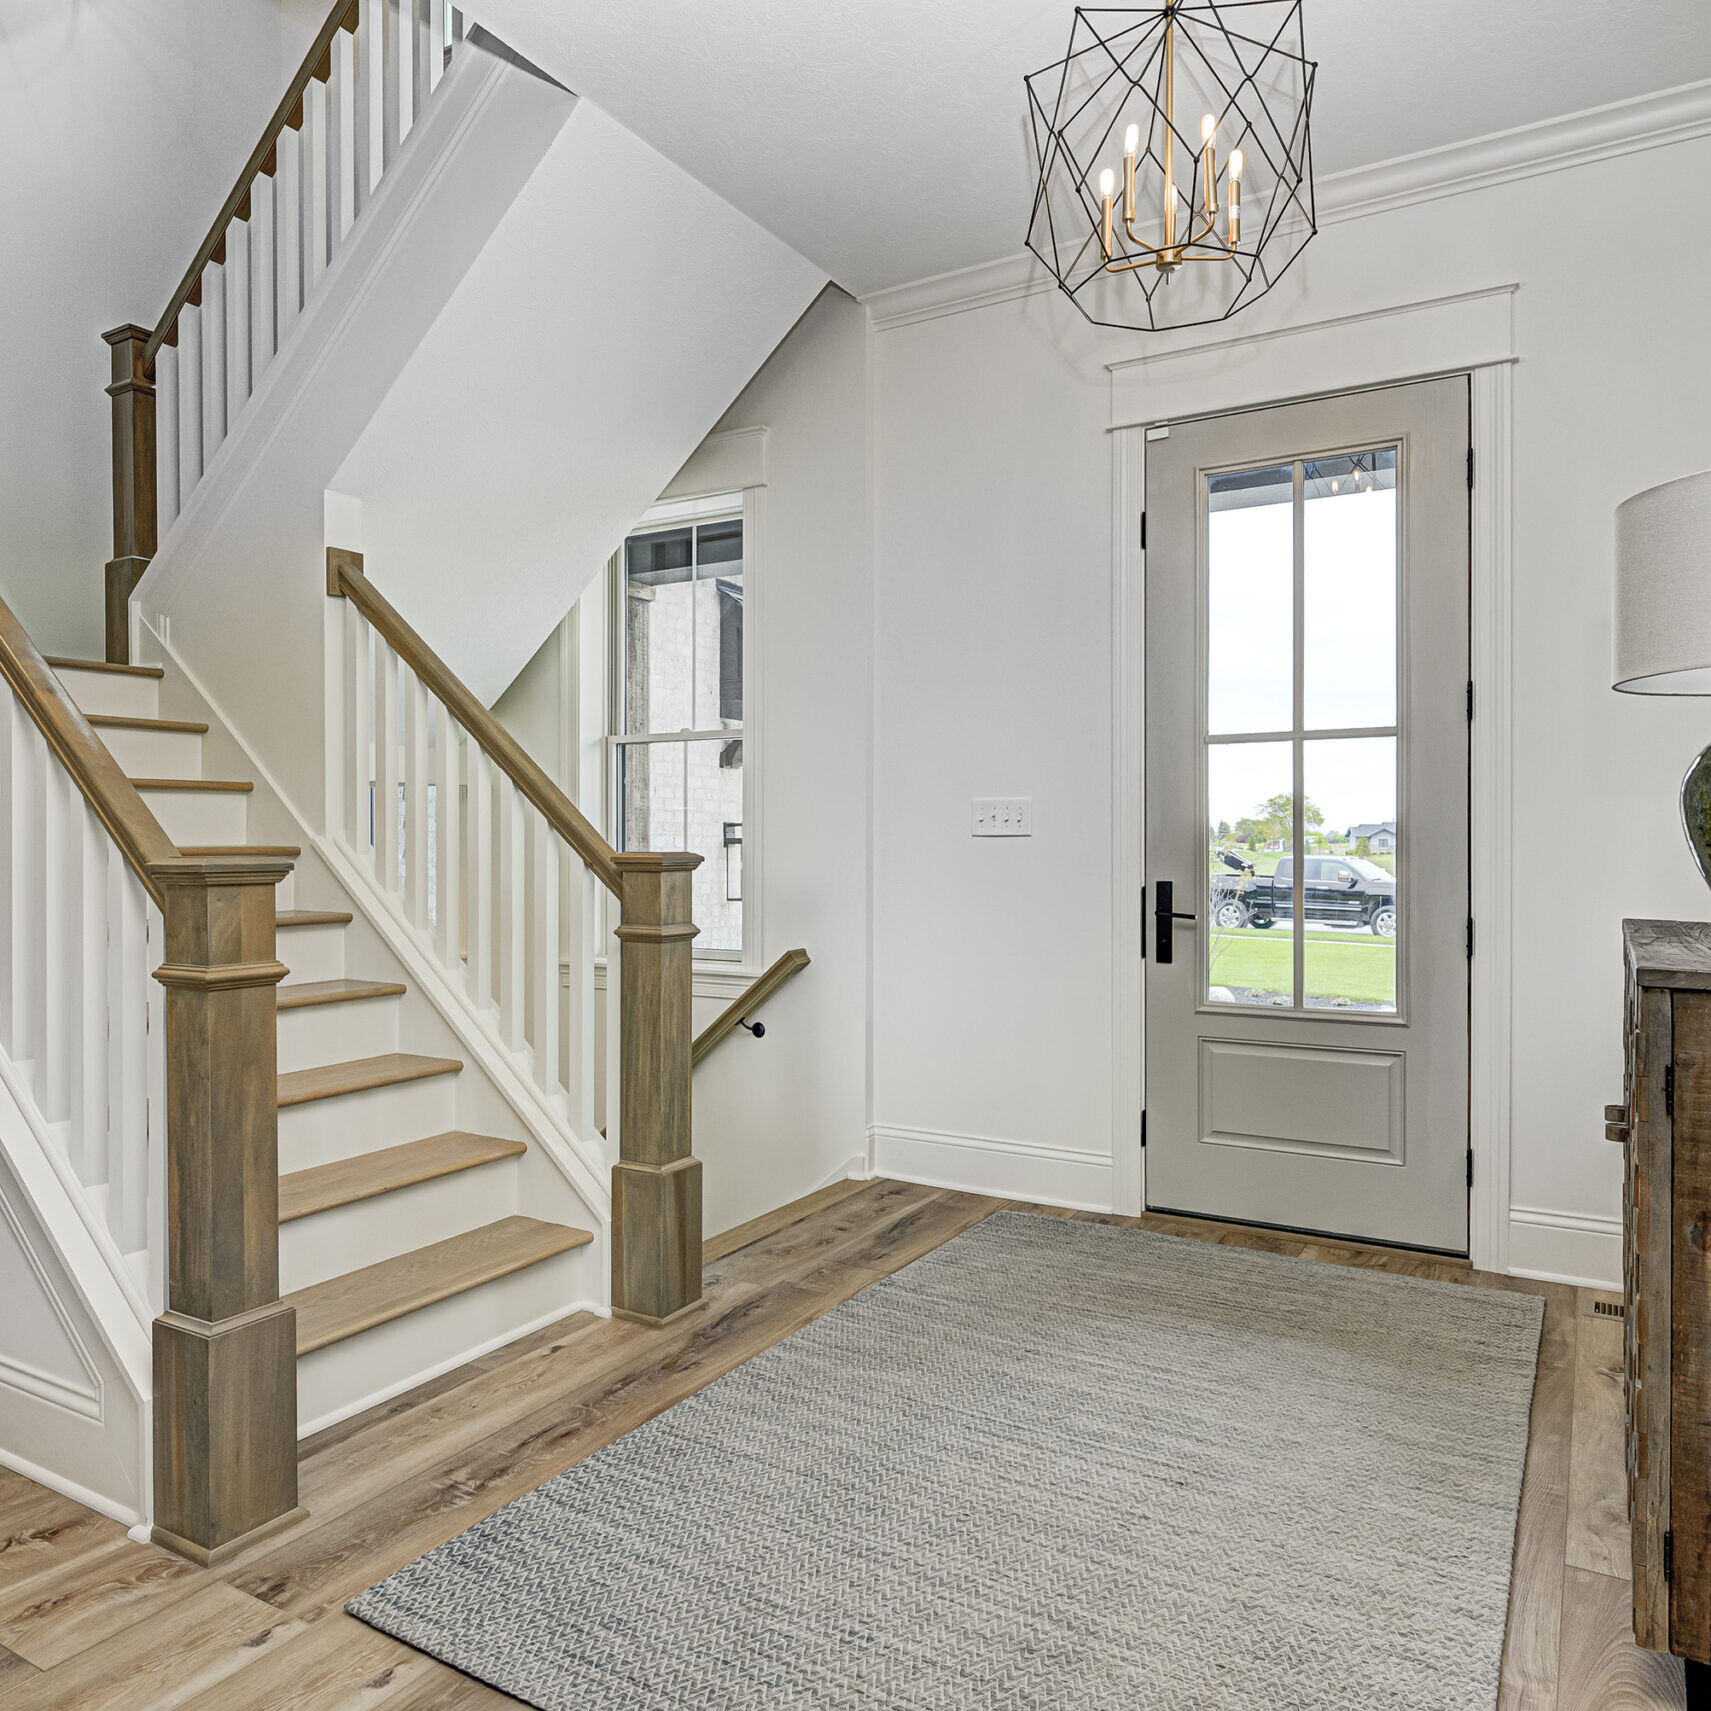 A hallway with hardwood floors and a staircase, designed by a Custom Home Builder in Indiana.